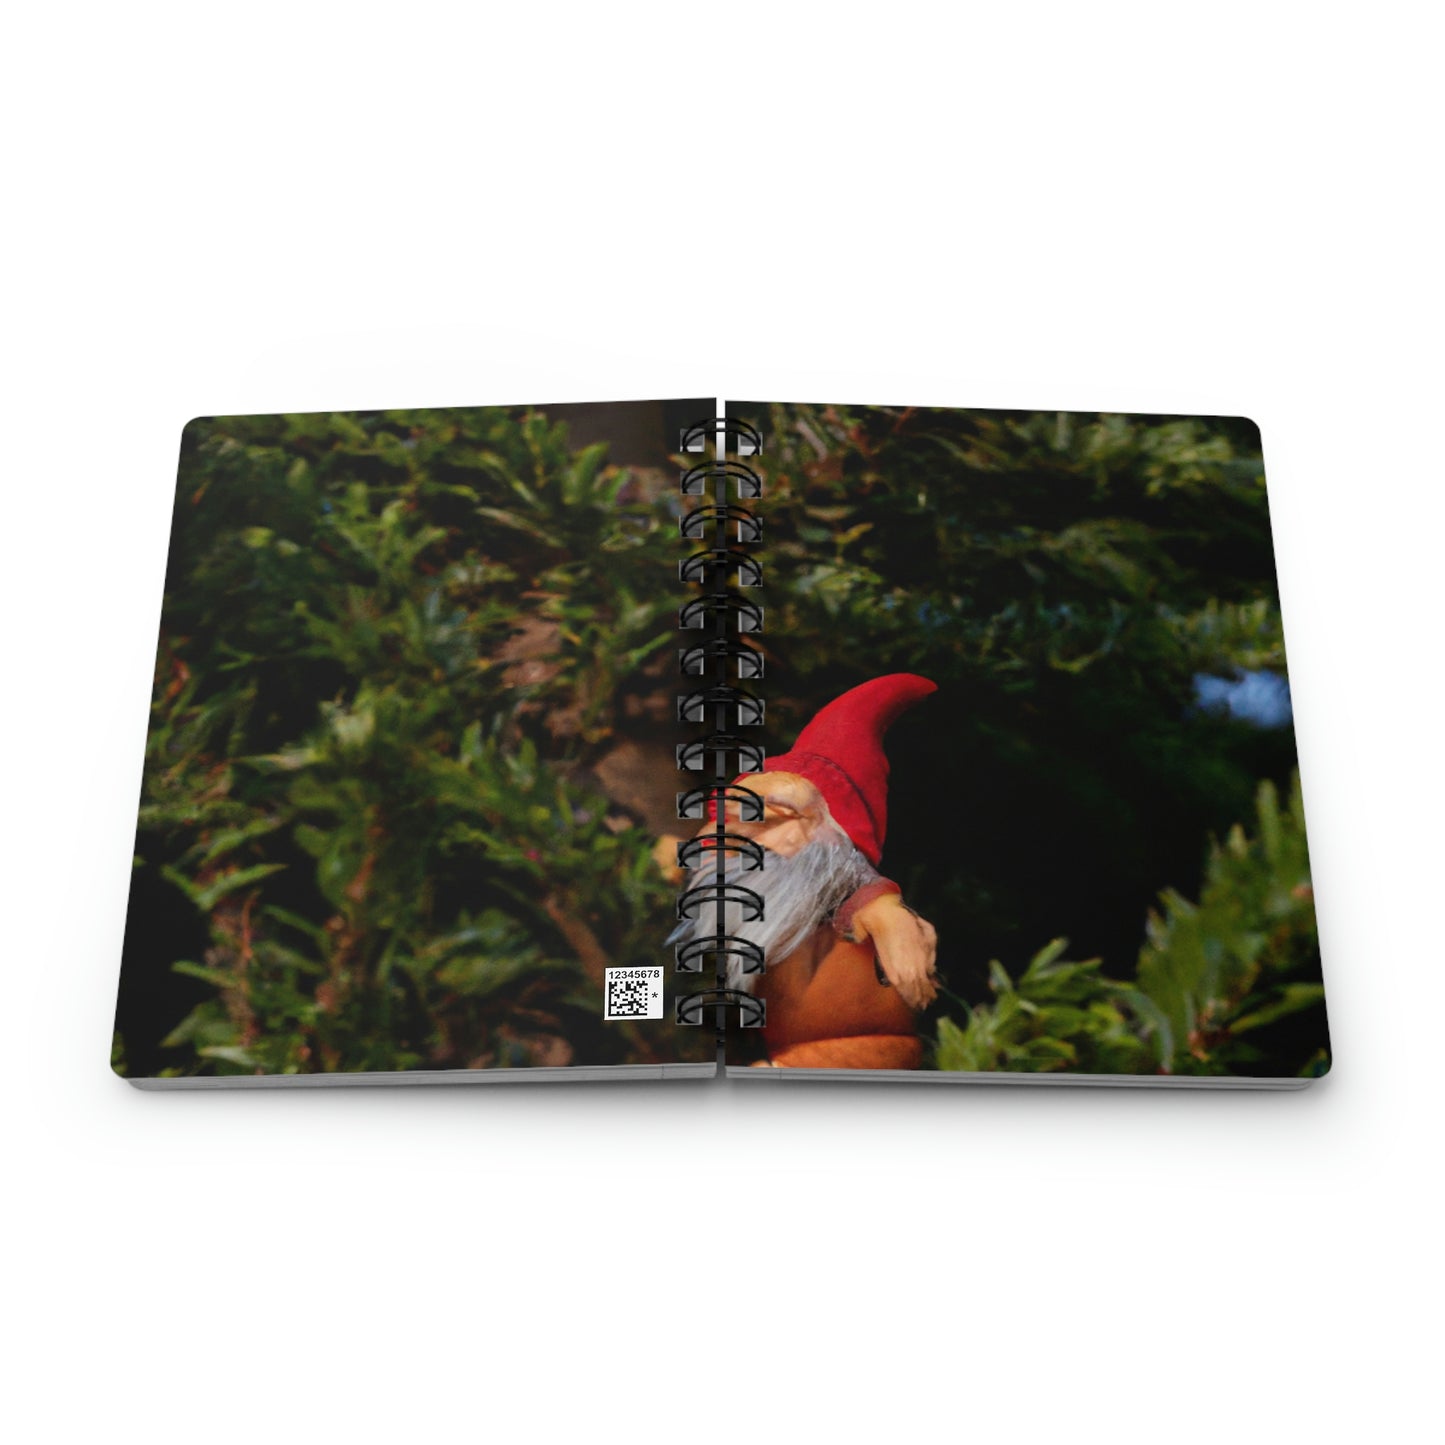 The Gnome's High-Rise Adventure - The Alien Spiral Bound Journal